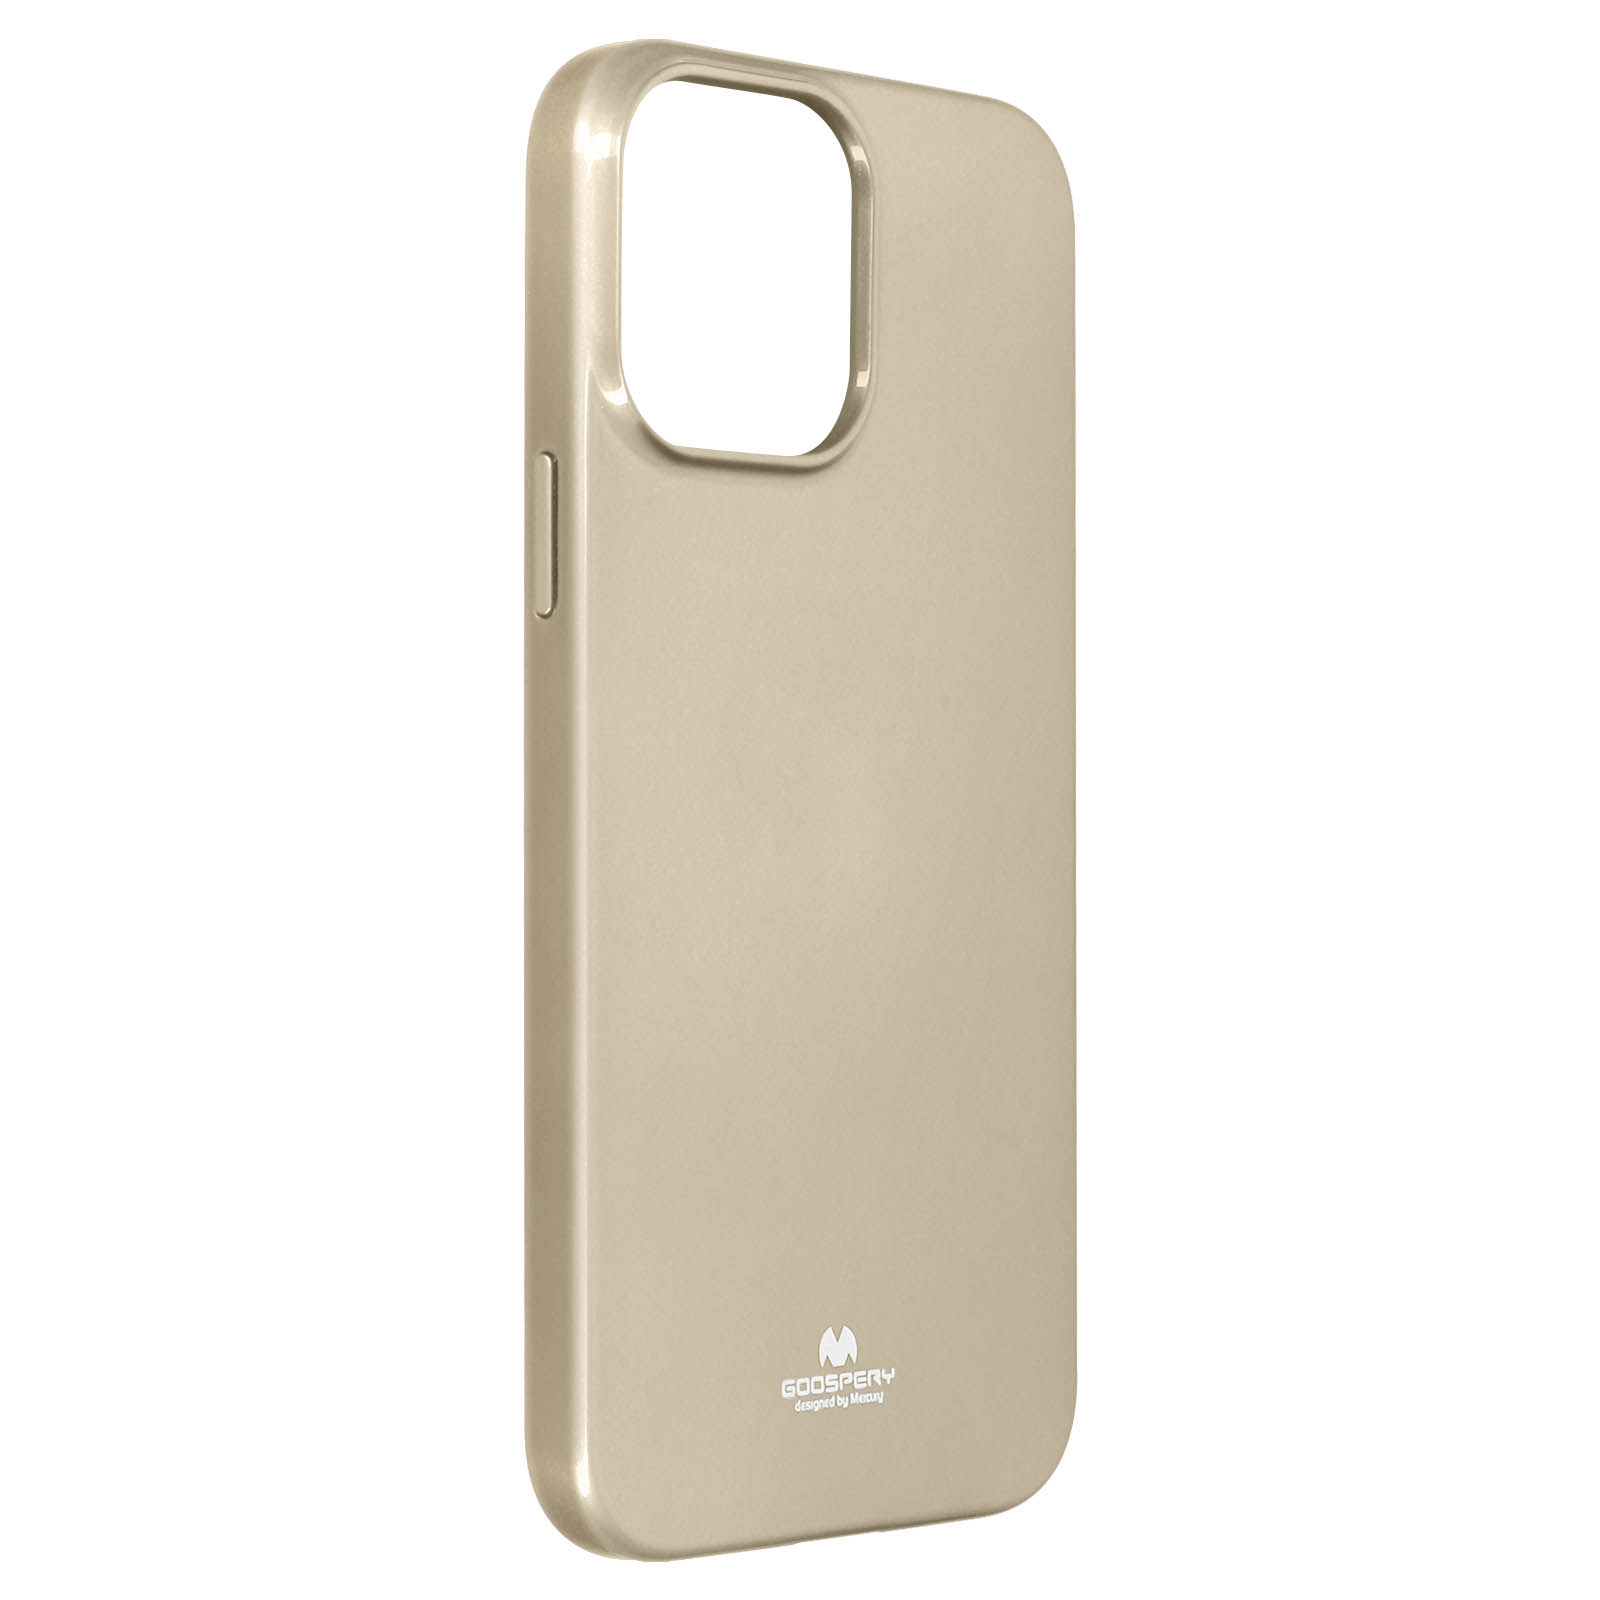 Backcover, 13, MERCURY Gold Series, iPhone Jelly Apple,